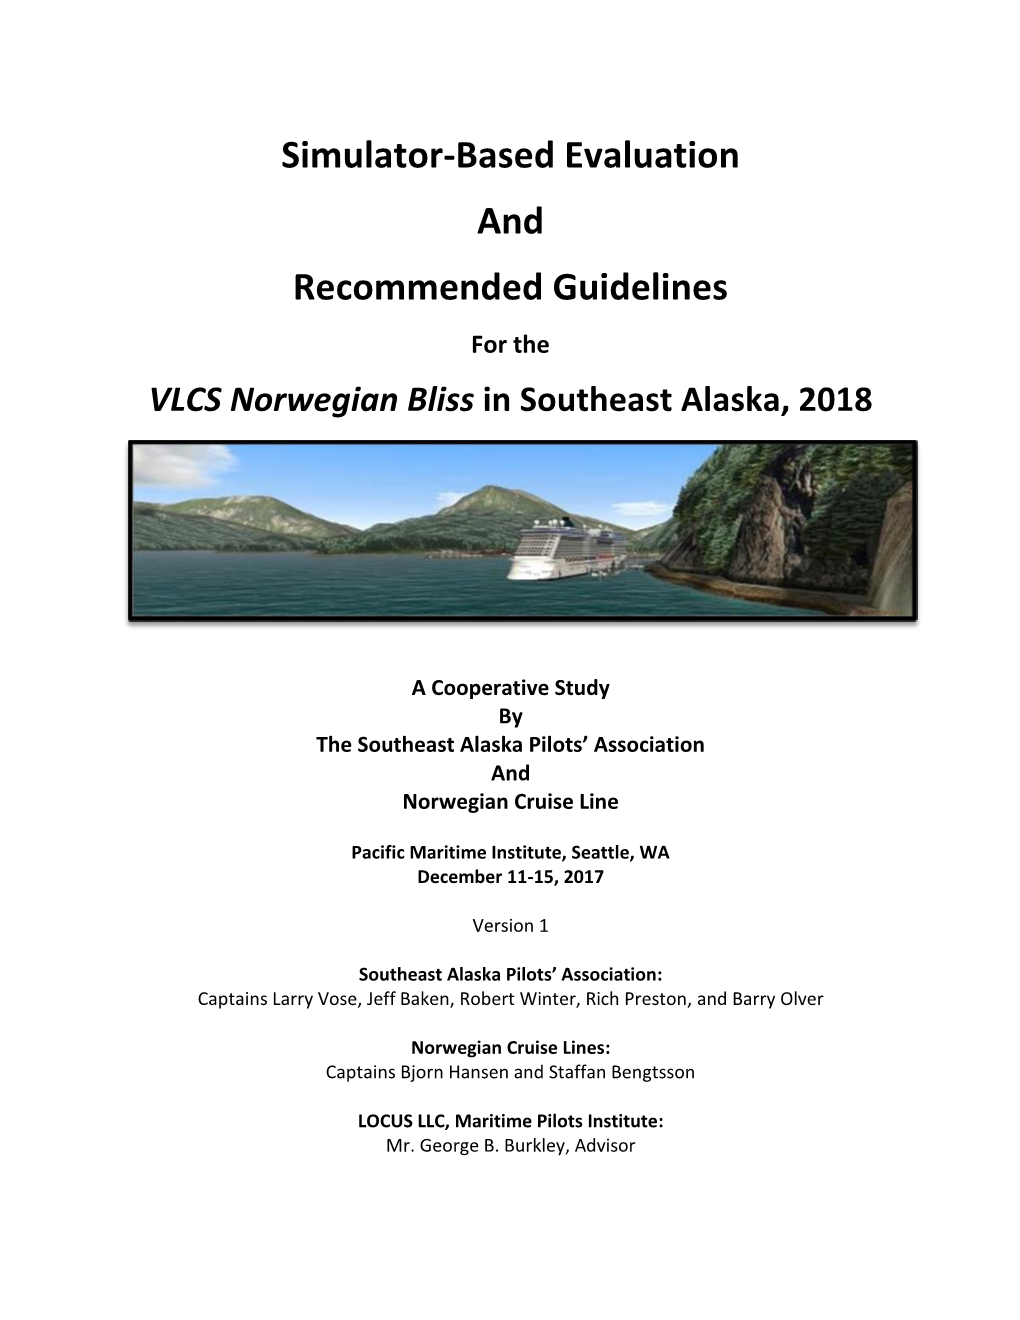 Simulator-Based Evaluation and Recommended Guidelines for the VLCS Norwegian Bliss in Southeast Alaska, 2018